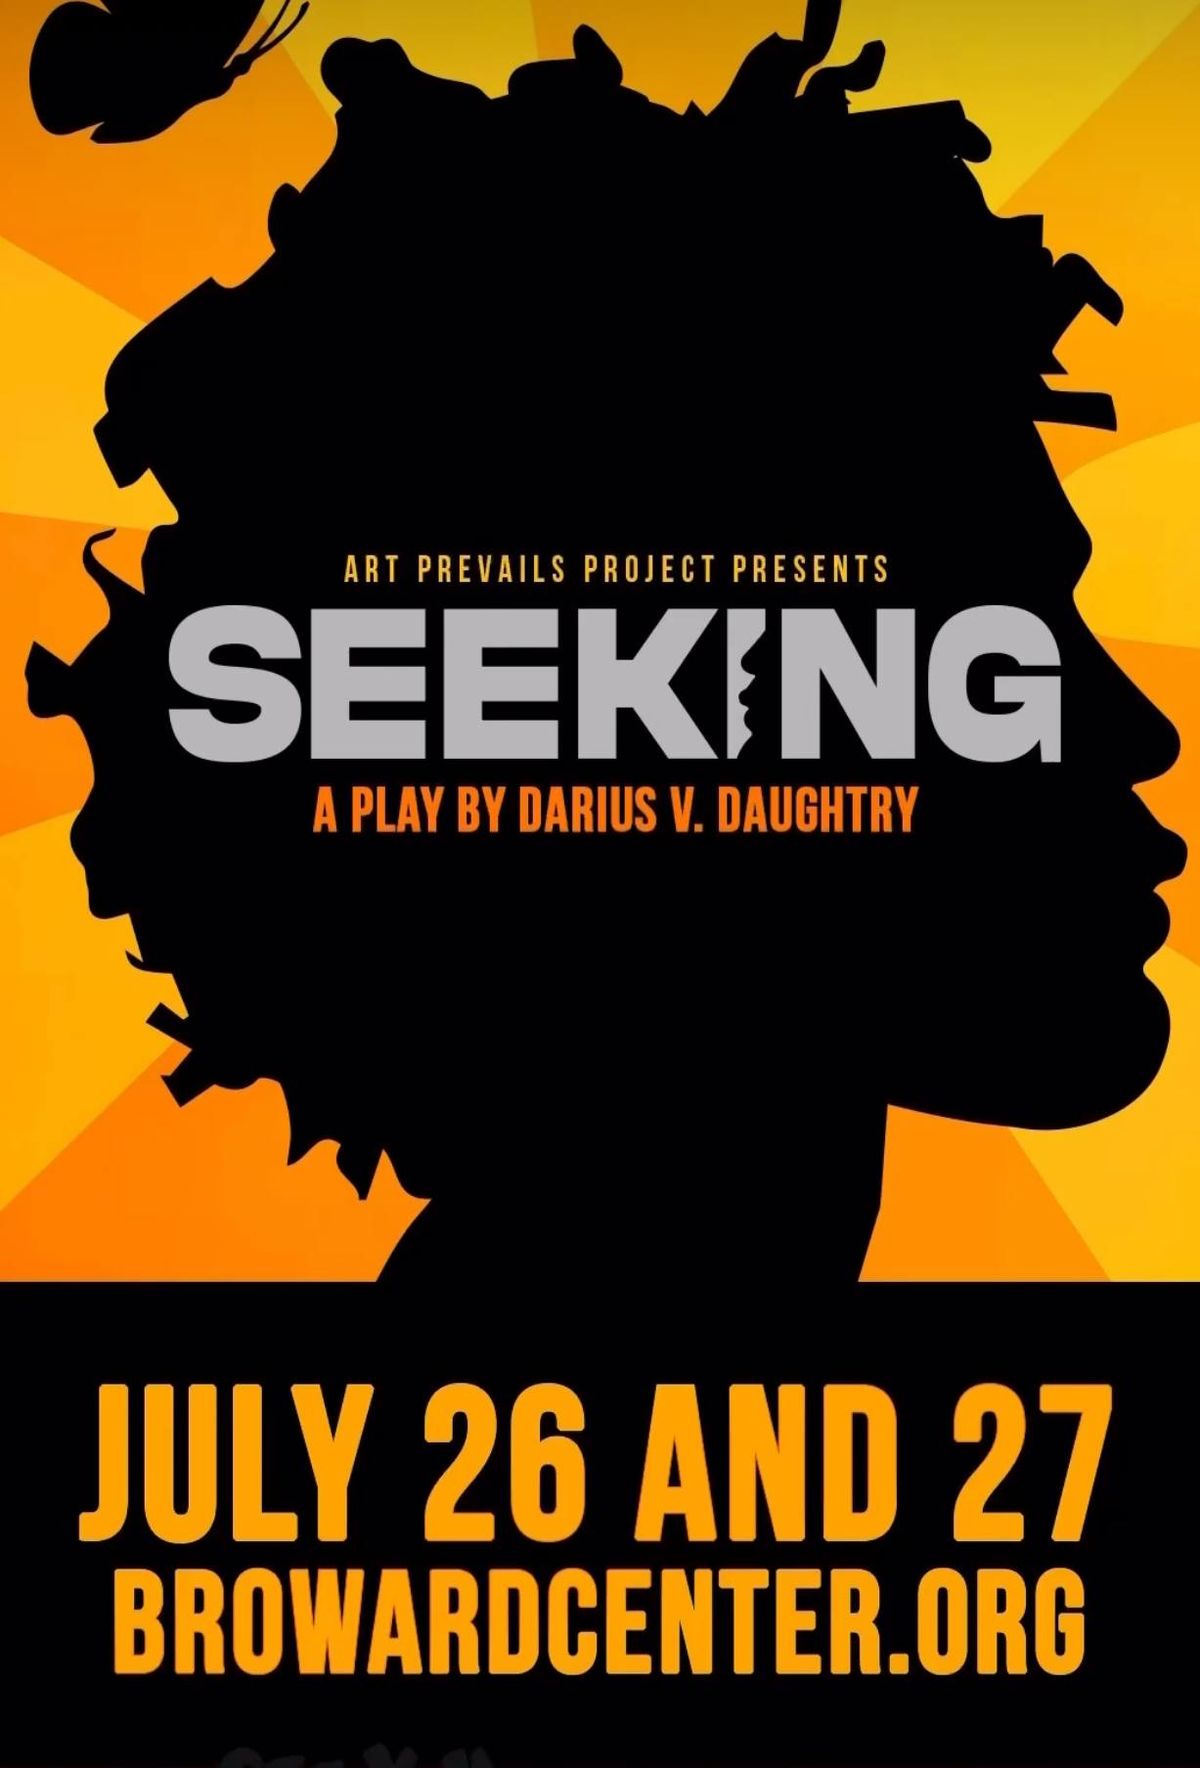 Seeking a play Darius V. Daughtry - Art Prevails Project 